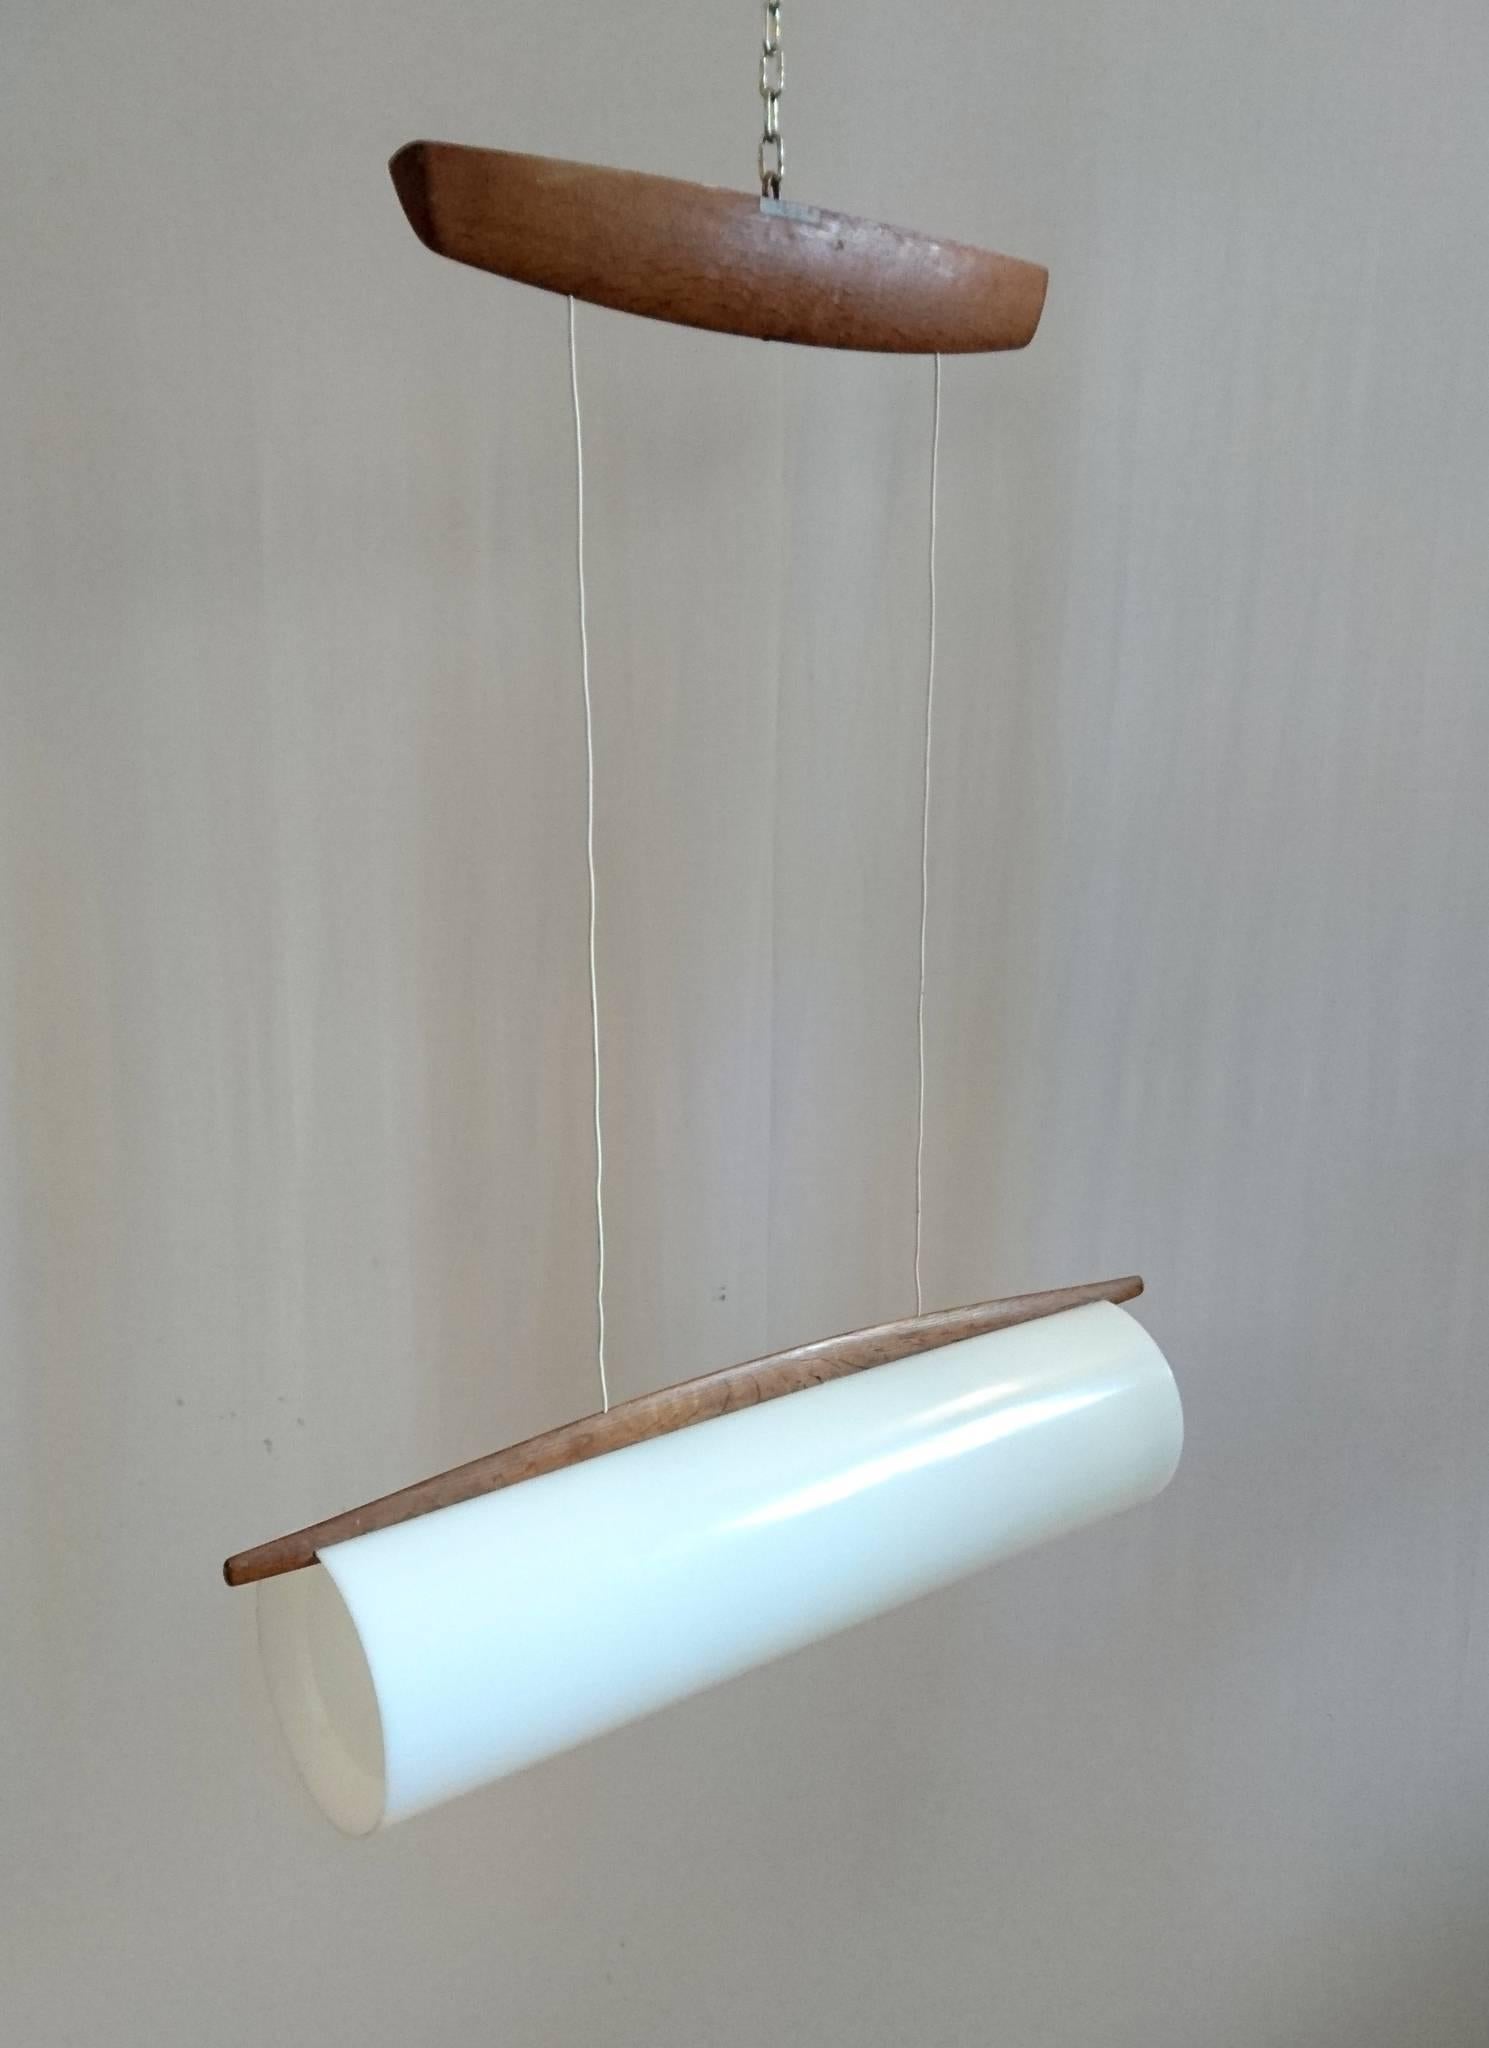 Cylindrical ceiling lamp adjustable in height and made from white plexiglass and oak. This lamp has model number 554, which is rare was designed by Uno and Osten Kristiansson. Produced by Luxus in Vittsjö, Sweden. The original sticker from the